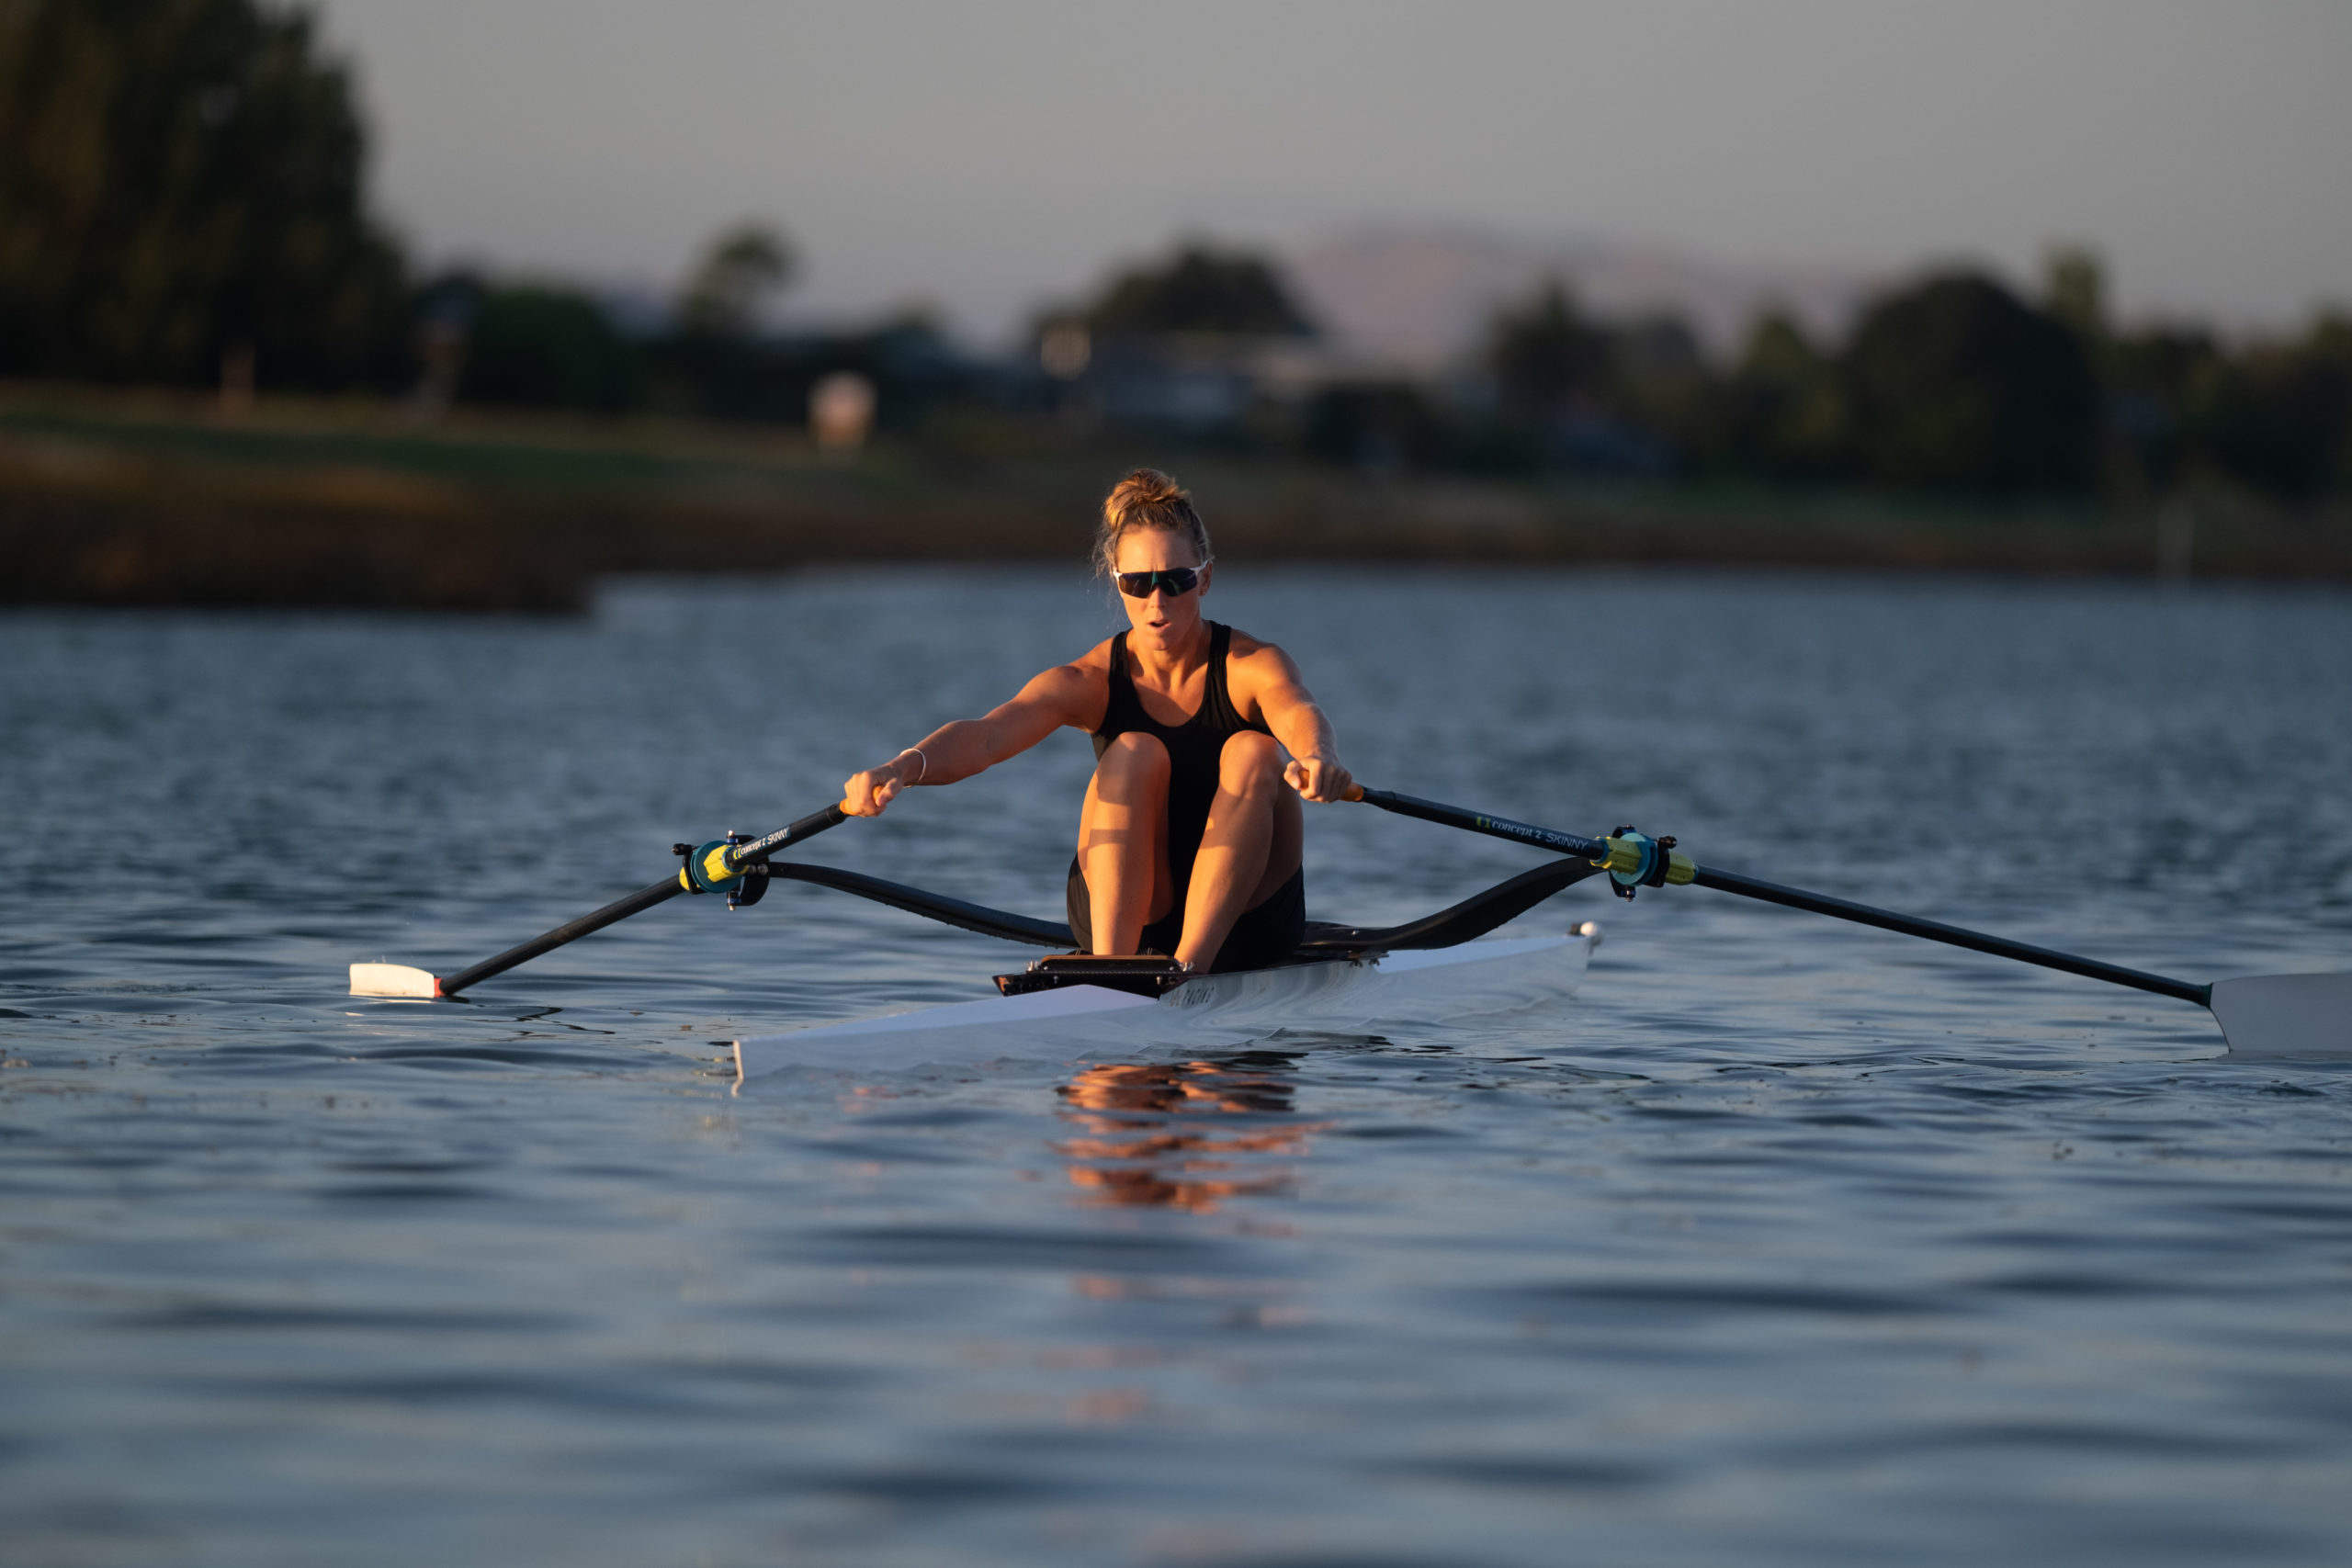 Olympic champion rower, Emma Twigg rows a single rowing skiff made by SL Racing on the Clive River.